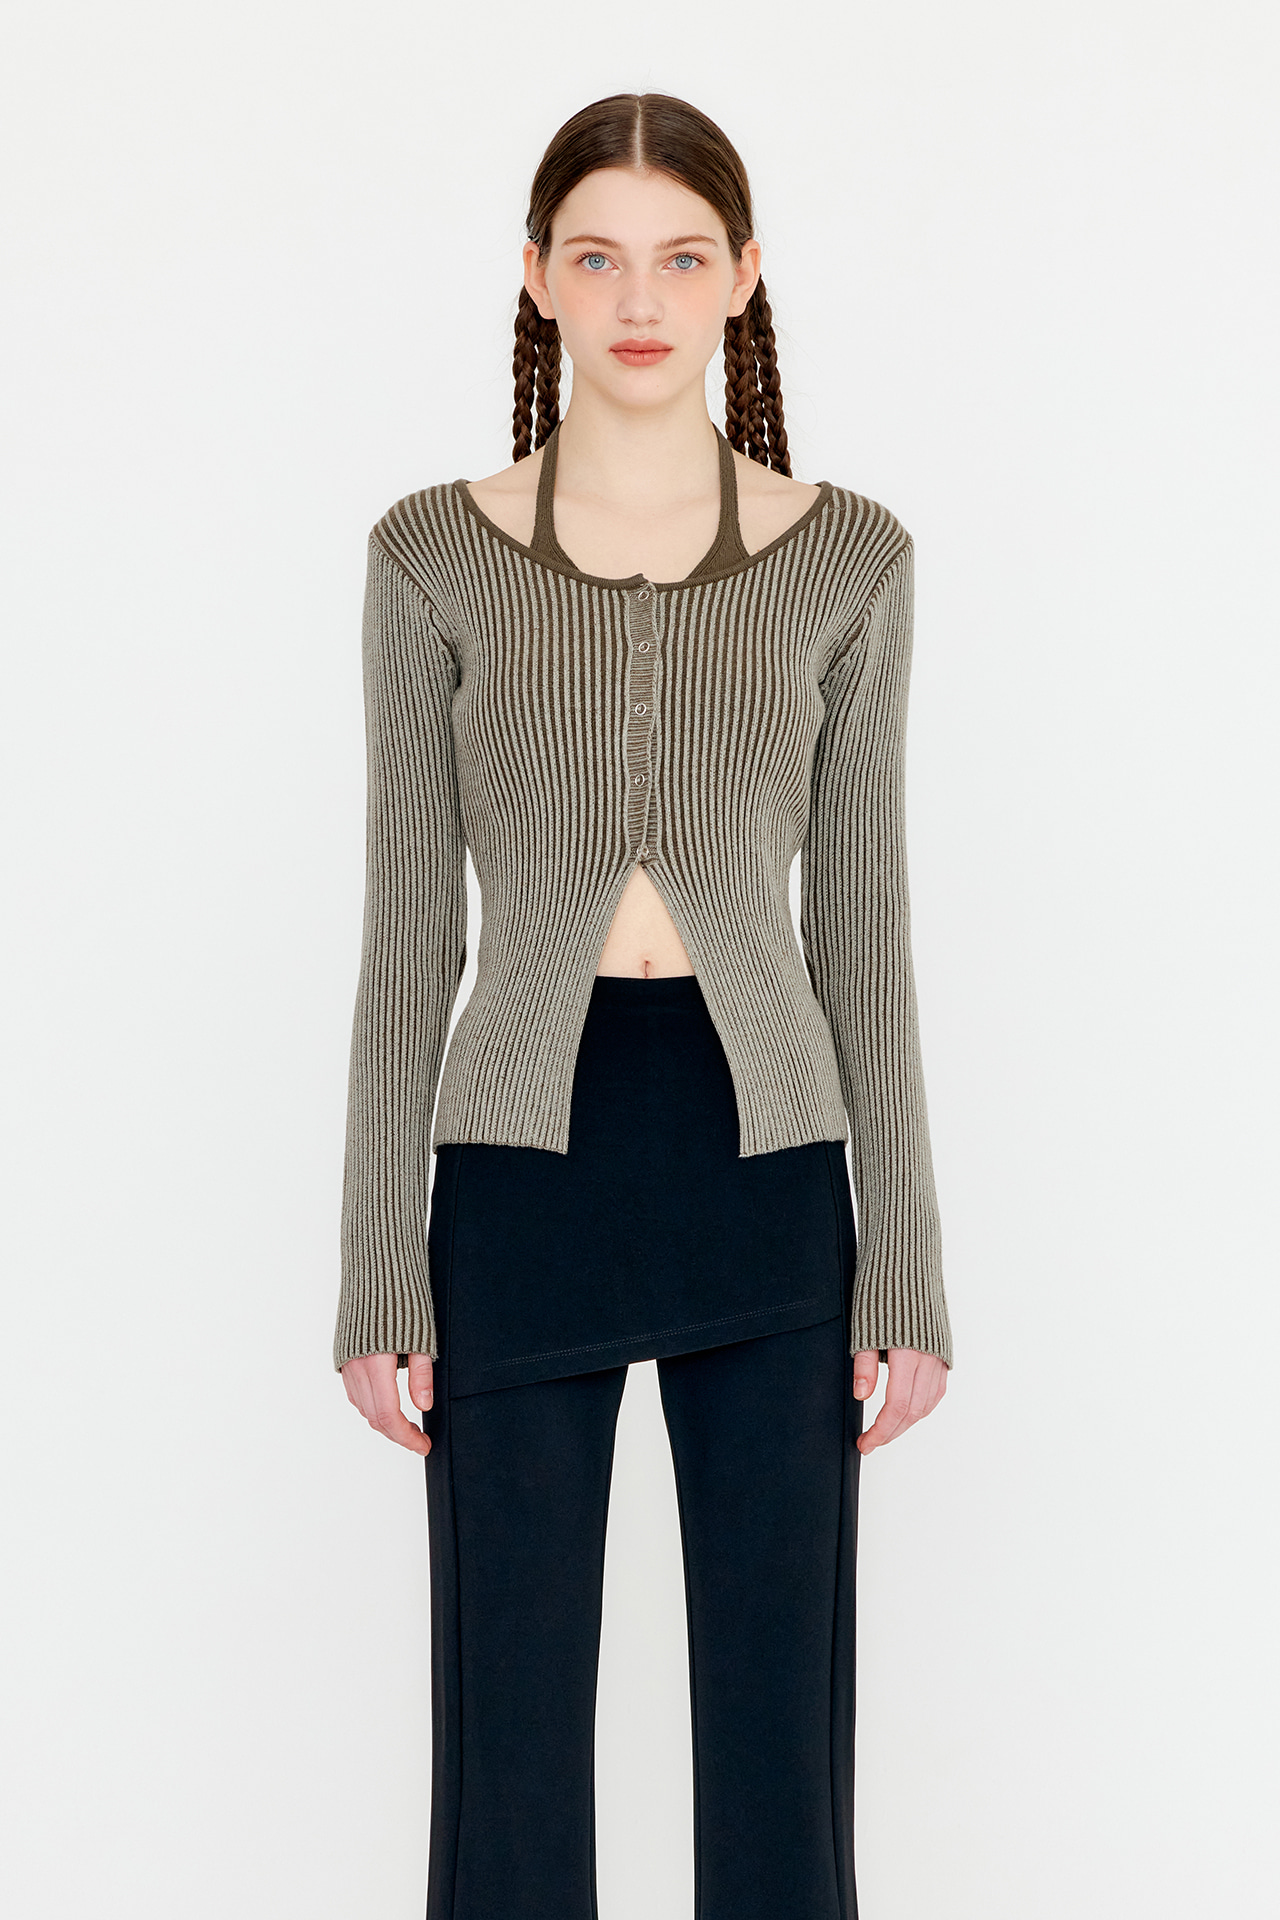 TWO TONE HALTER SLEEVE LAYERED KNIT TOP - KHAKI BROWN